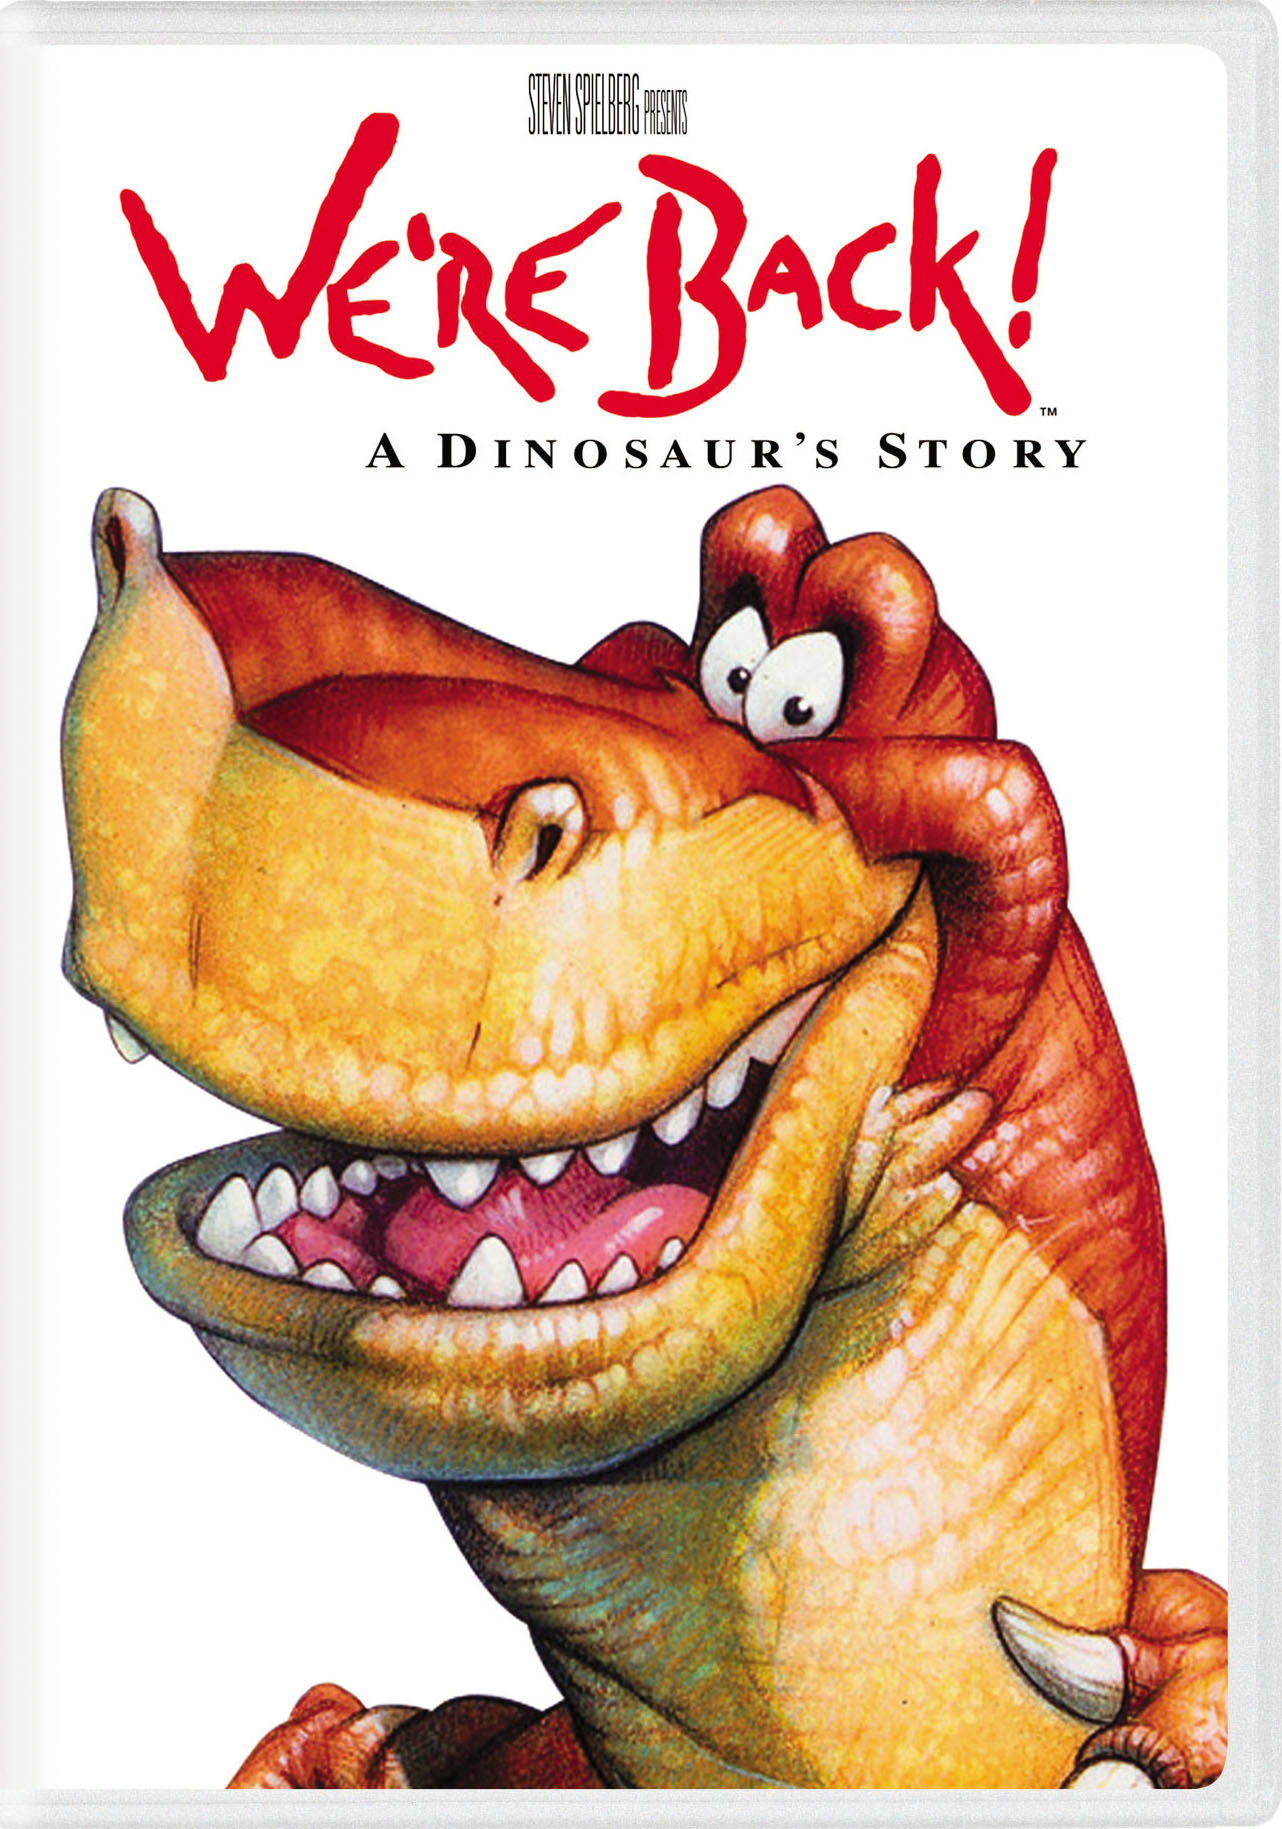 We're Back! A Dinosaur's Story - DVD [ 1993 ]  - Children Movies On DVD - Movies On GRUV